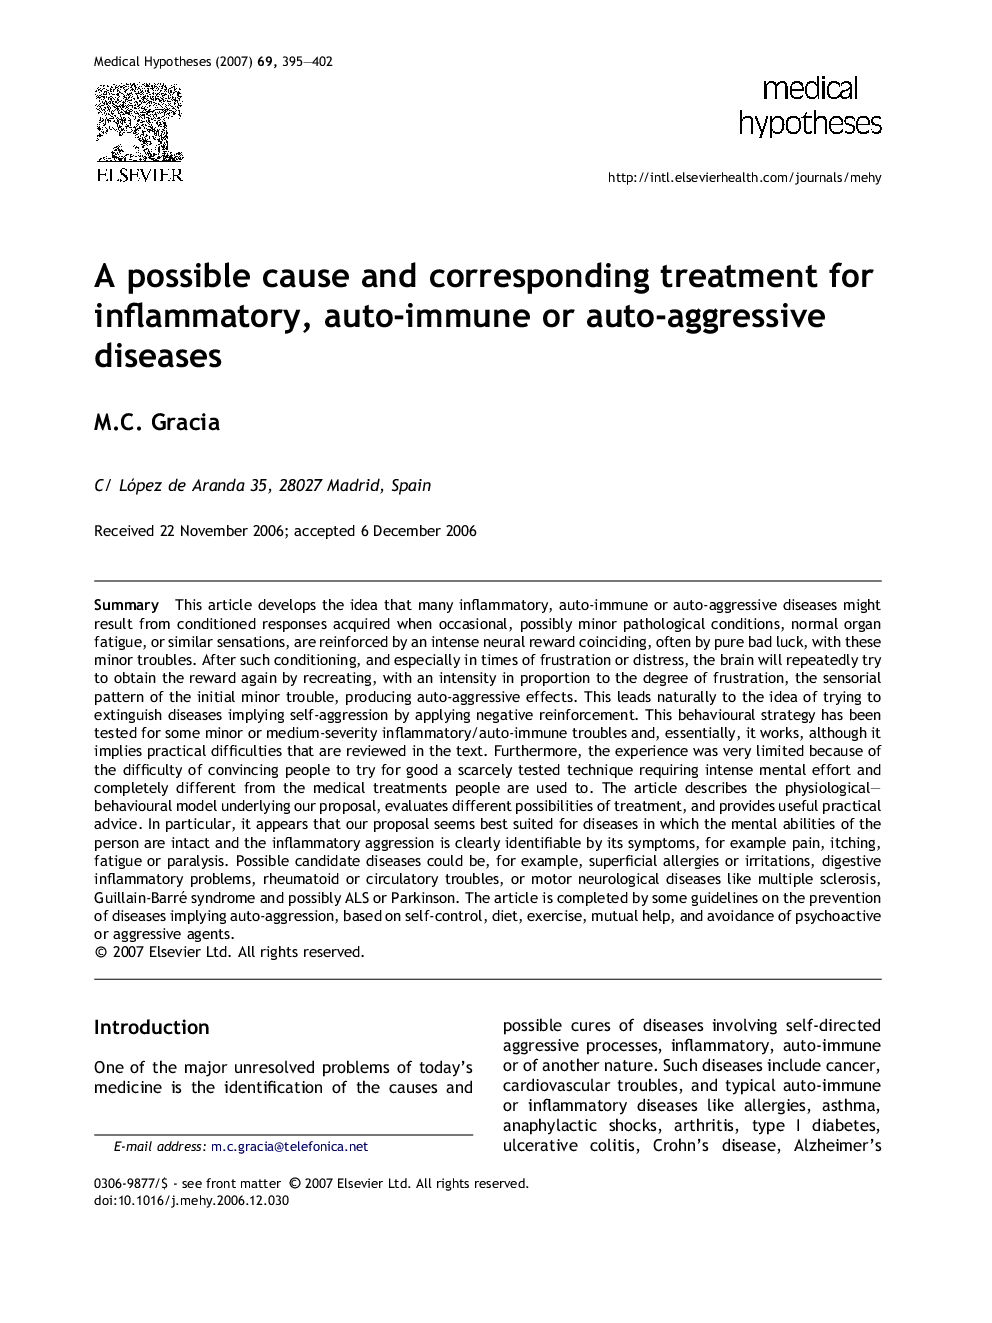 A possible cause and corresponding treatment for inflammatory, auto-immune or auto-aggressive diseases